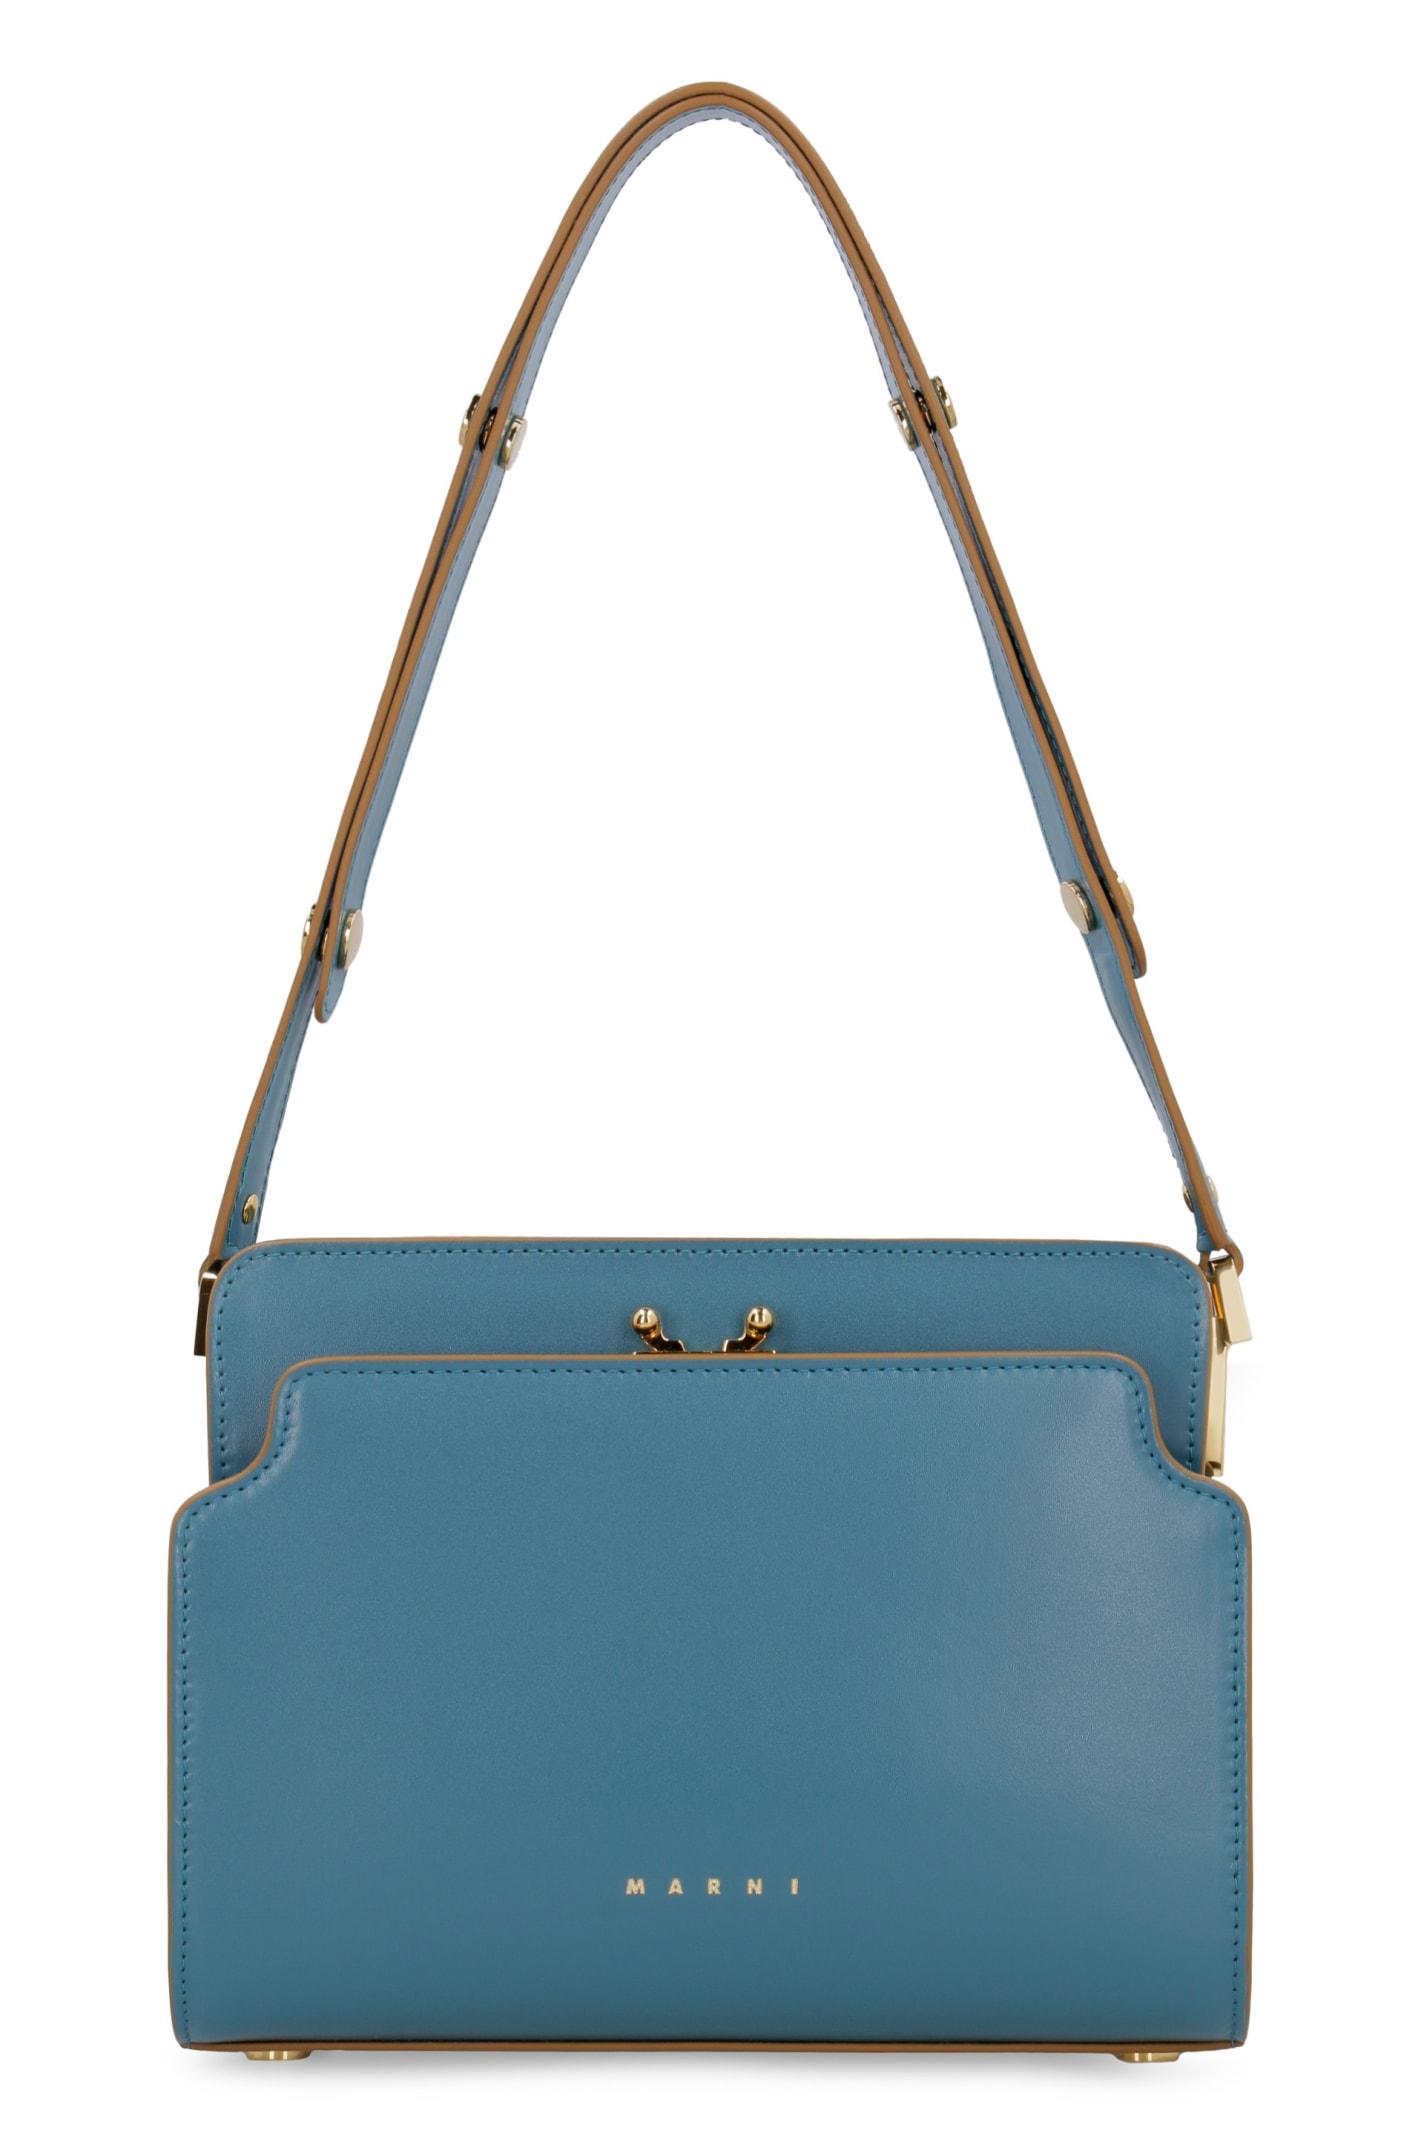 Marni Trunk Reverse Leather Shoulder Bag in Turquoise (Blue) | Lyst